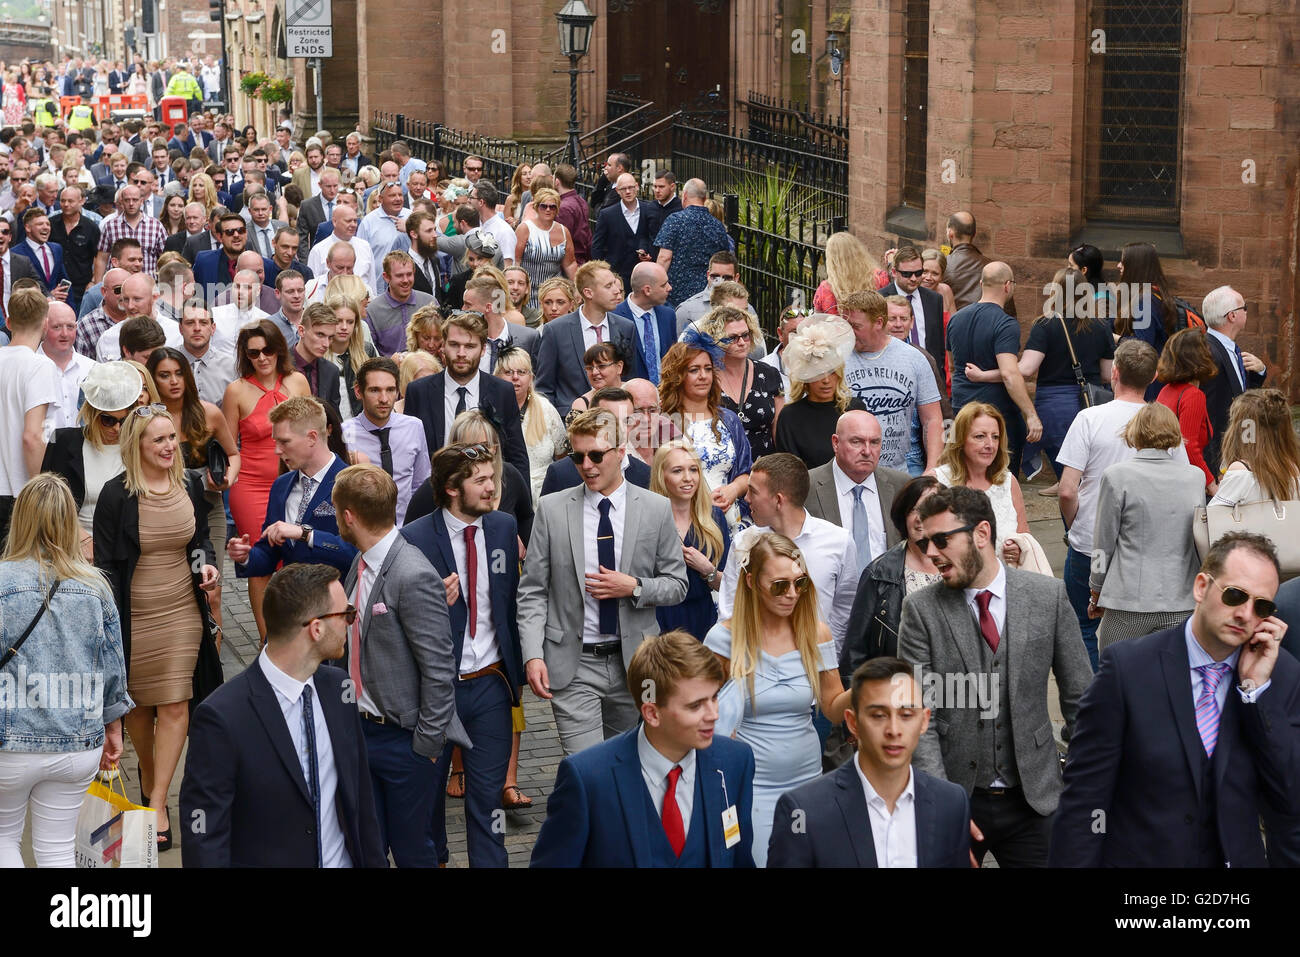 Chester Races, Chester, UK. 28th May 2016. After the final race of the meeting, racegoers make the short walk from the racecourse towards the pubs, bars and restaurants on Watergate Street in Chester city centre. Andrew Paterson/ Alamy Live News. Stock Photo